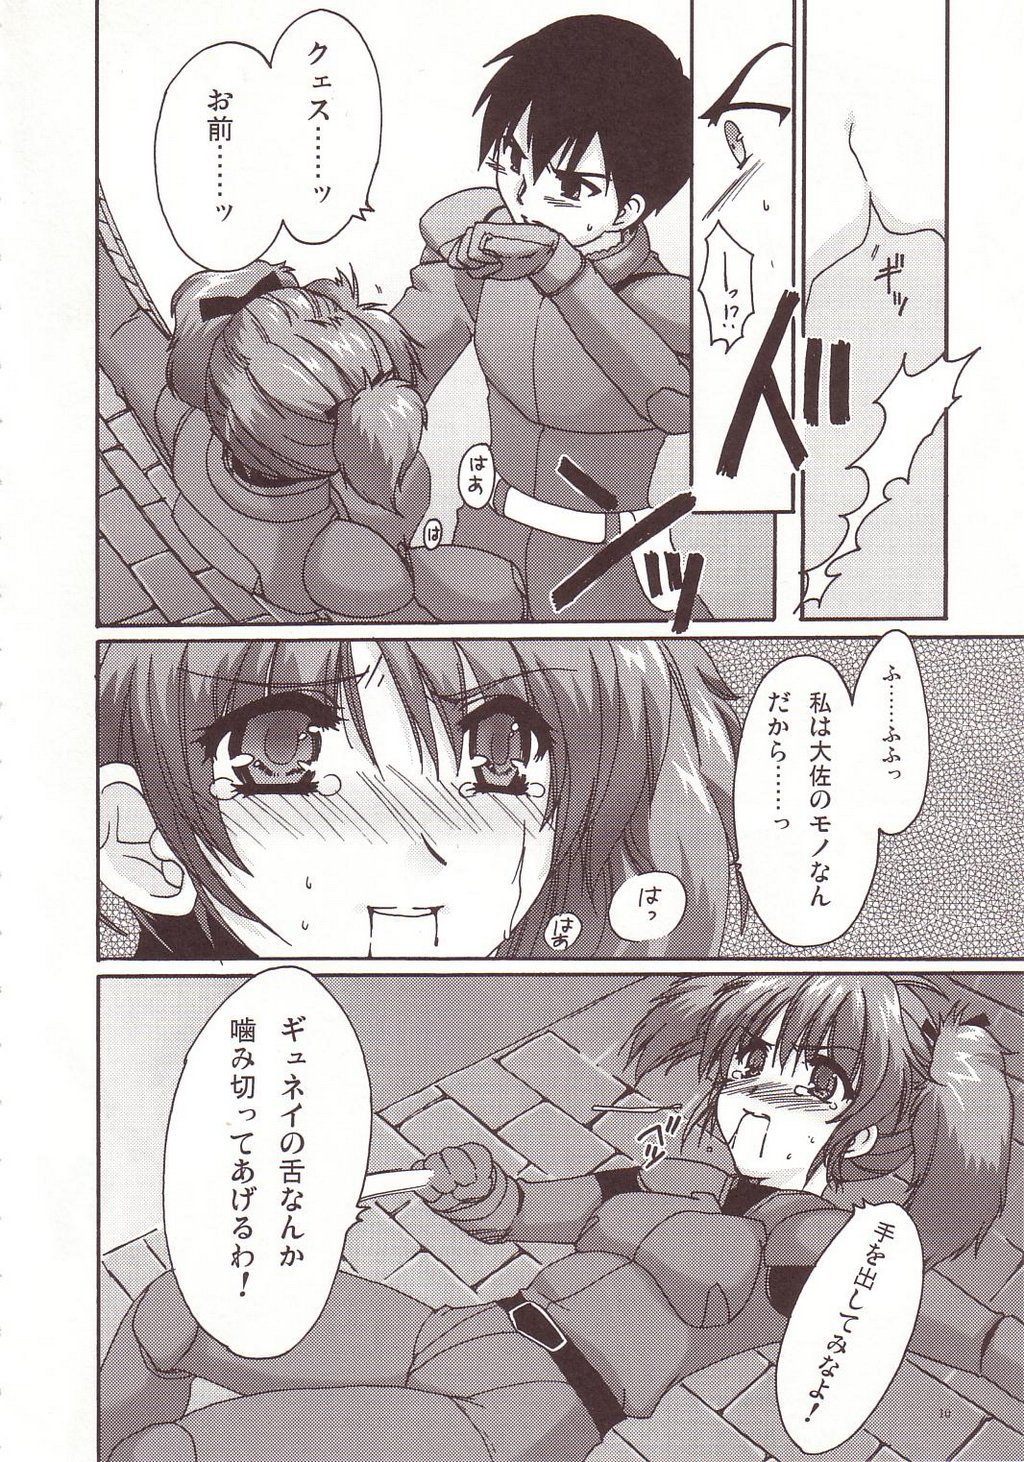 [AKABEi SOFT (Alpha)] Aishitai I WANT TO LOVE (Mobile Suit Gundam Char's Counterattack) page 9 full